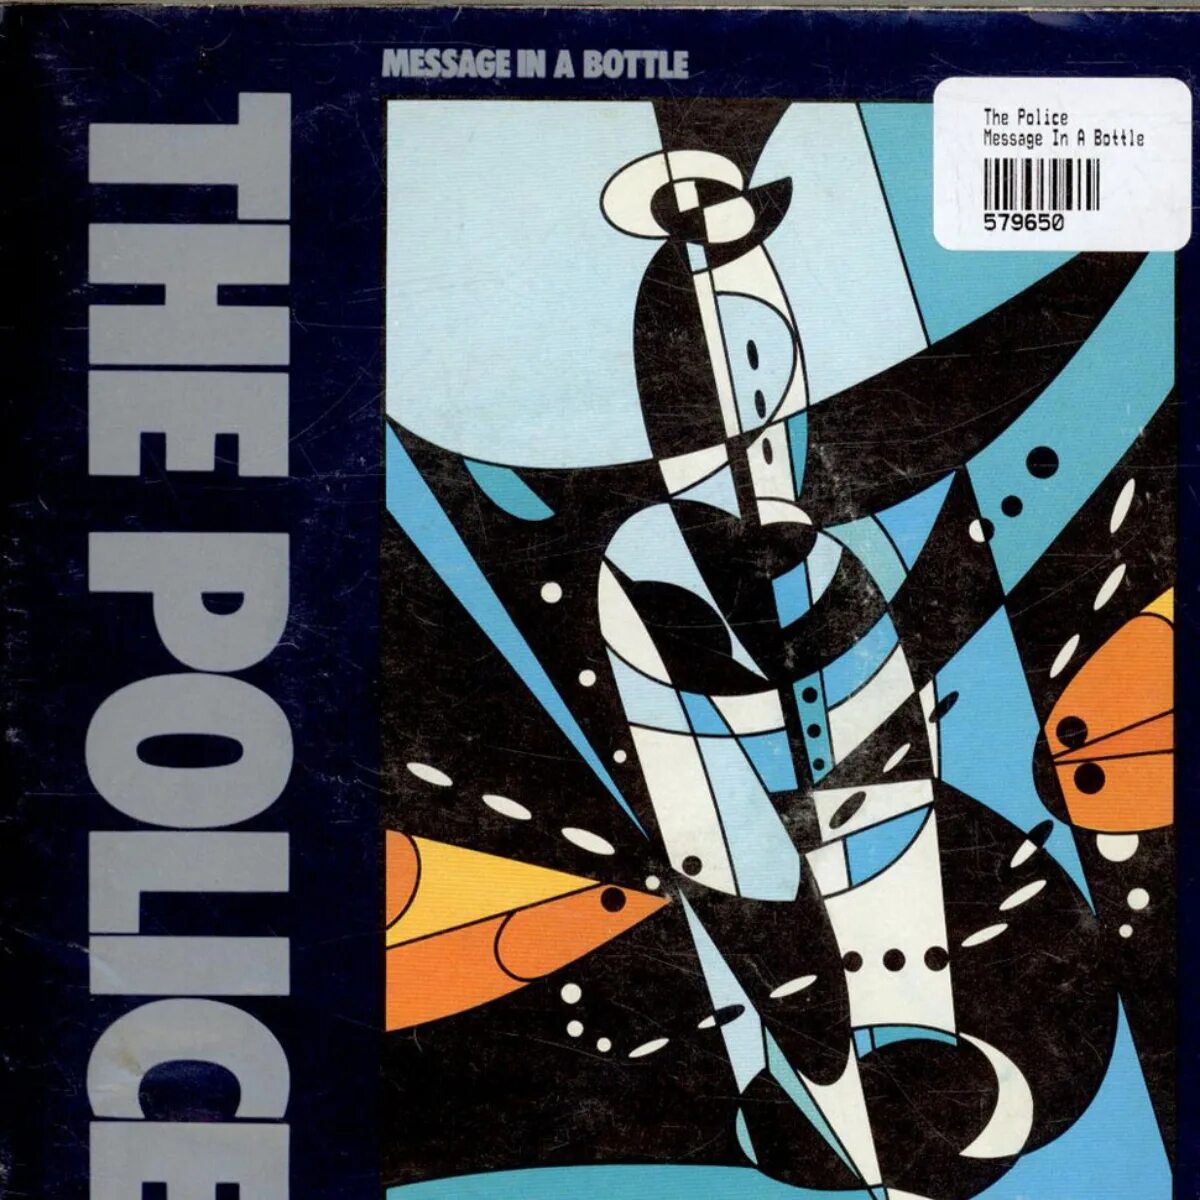 The police message. The Police message in a Bottle. The Police message in a Bottle обложка альбома. The Police message in a Bottle Cover. The Police - 1979 - Reggatta de Blanc.